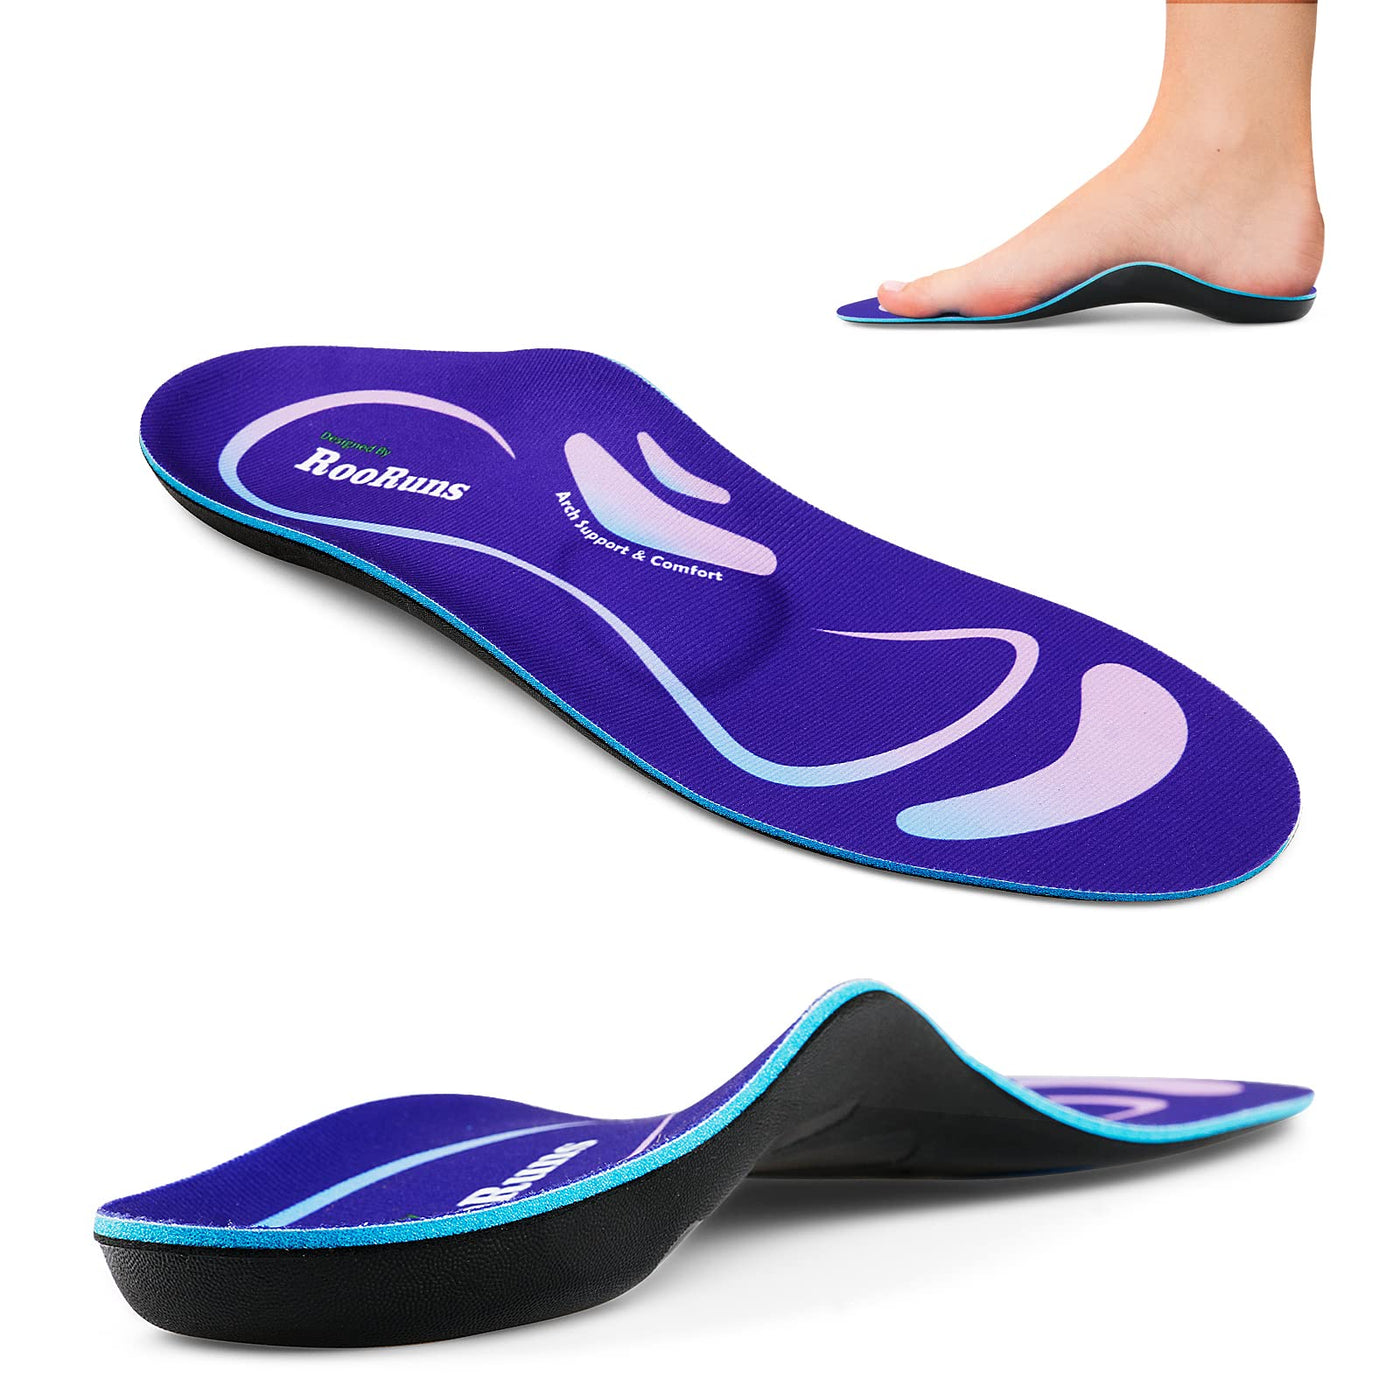 PCSsole High Arch Support Orthotics Sole Insole, Inserts For Moderate Flat  Foot,Plantar Fasciitis,Over Pronation,Feet Pain,Heel Pain,Toe Pain,Memory